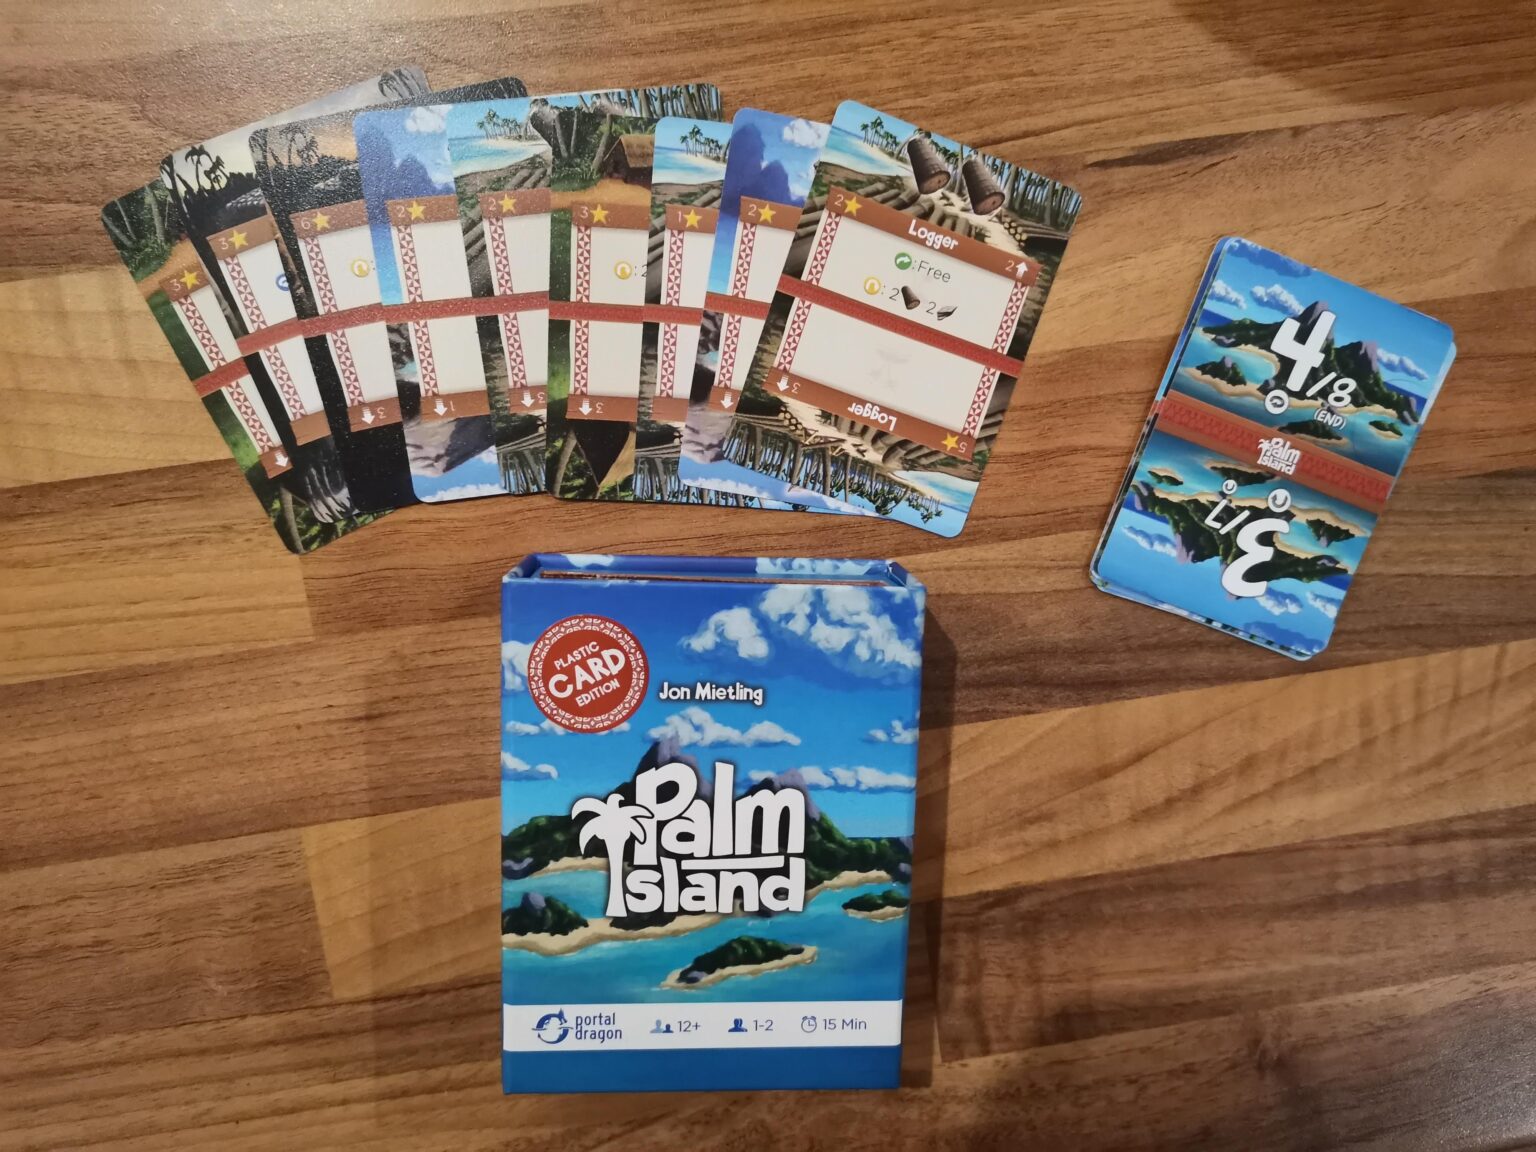 Palm Island Review - Punchboard Reviews